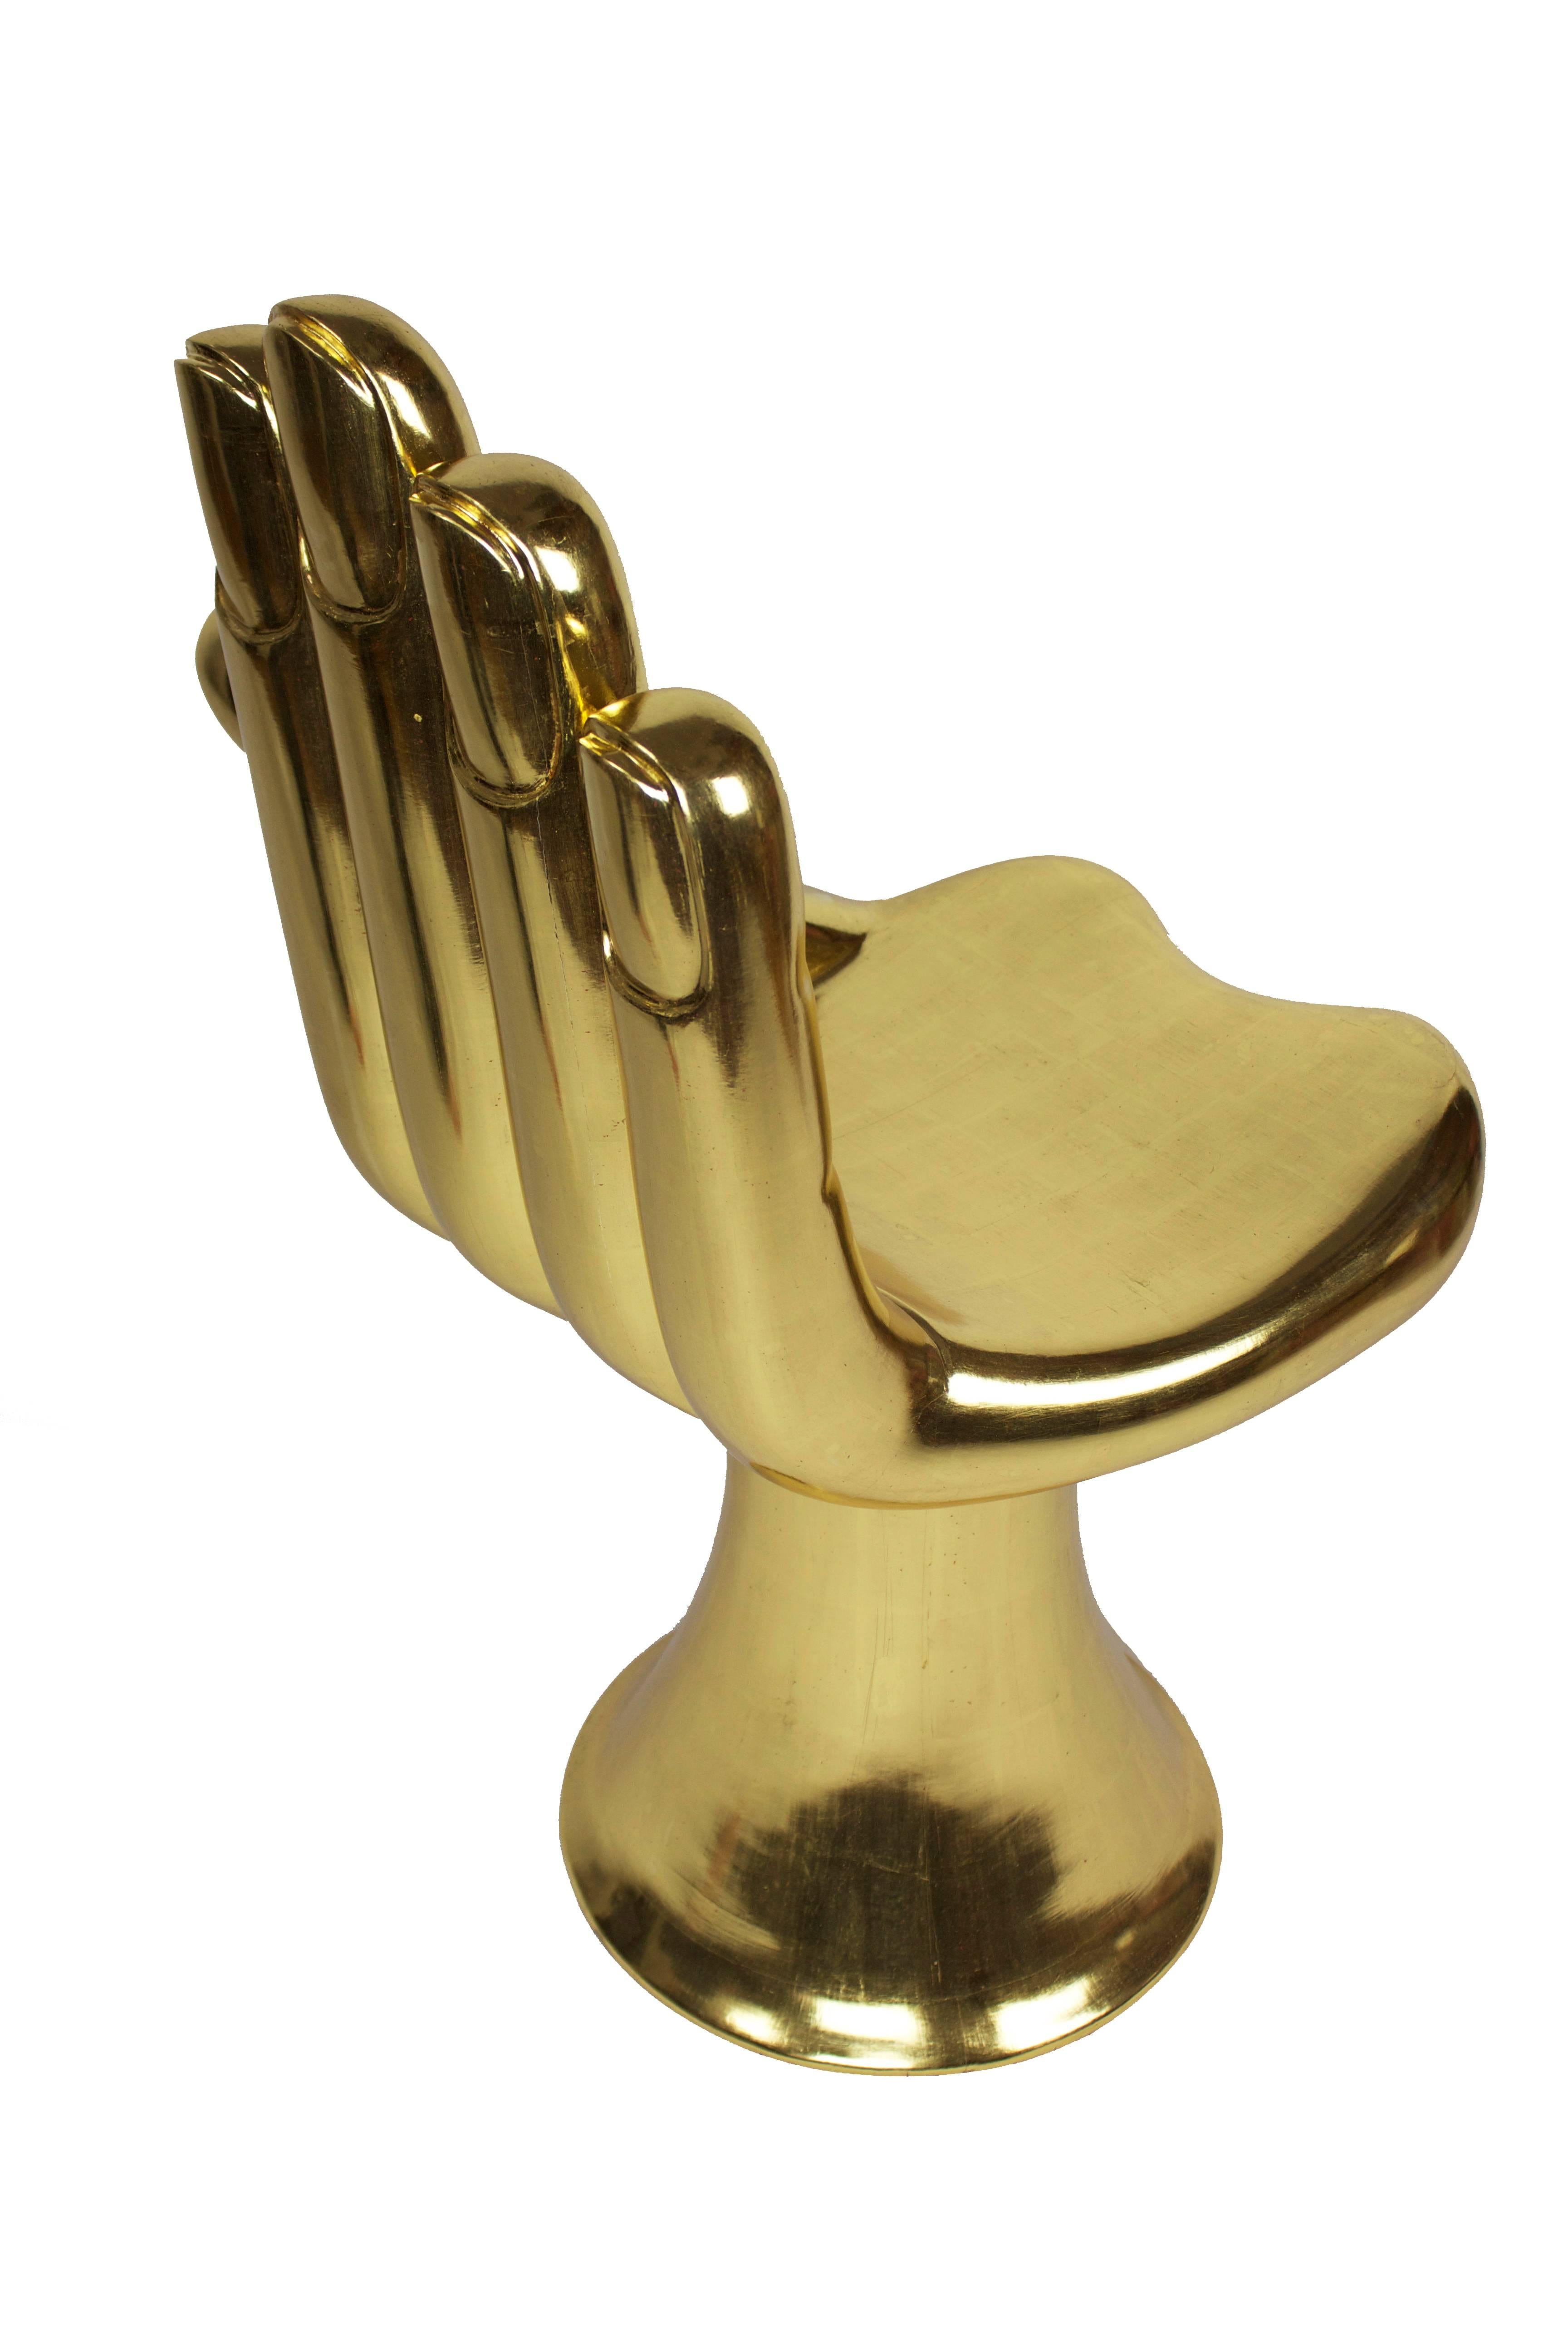 Gold Hand Chair - Sculpture by Pedro Friedeberg